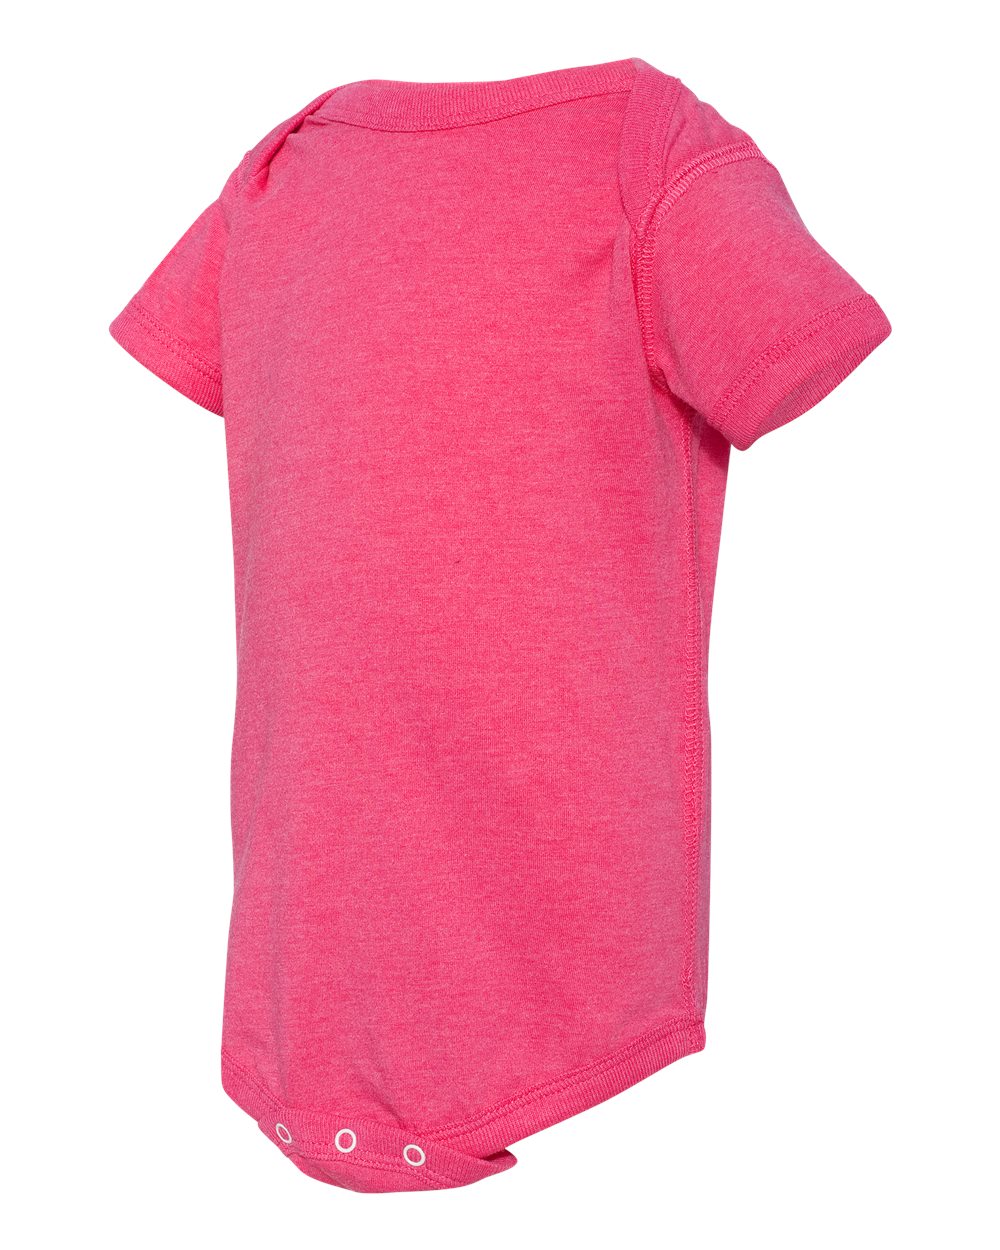 click to view Vintage Hot Pink